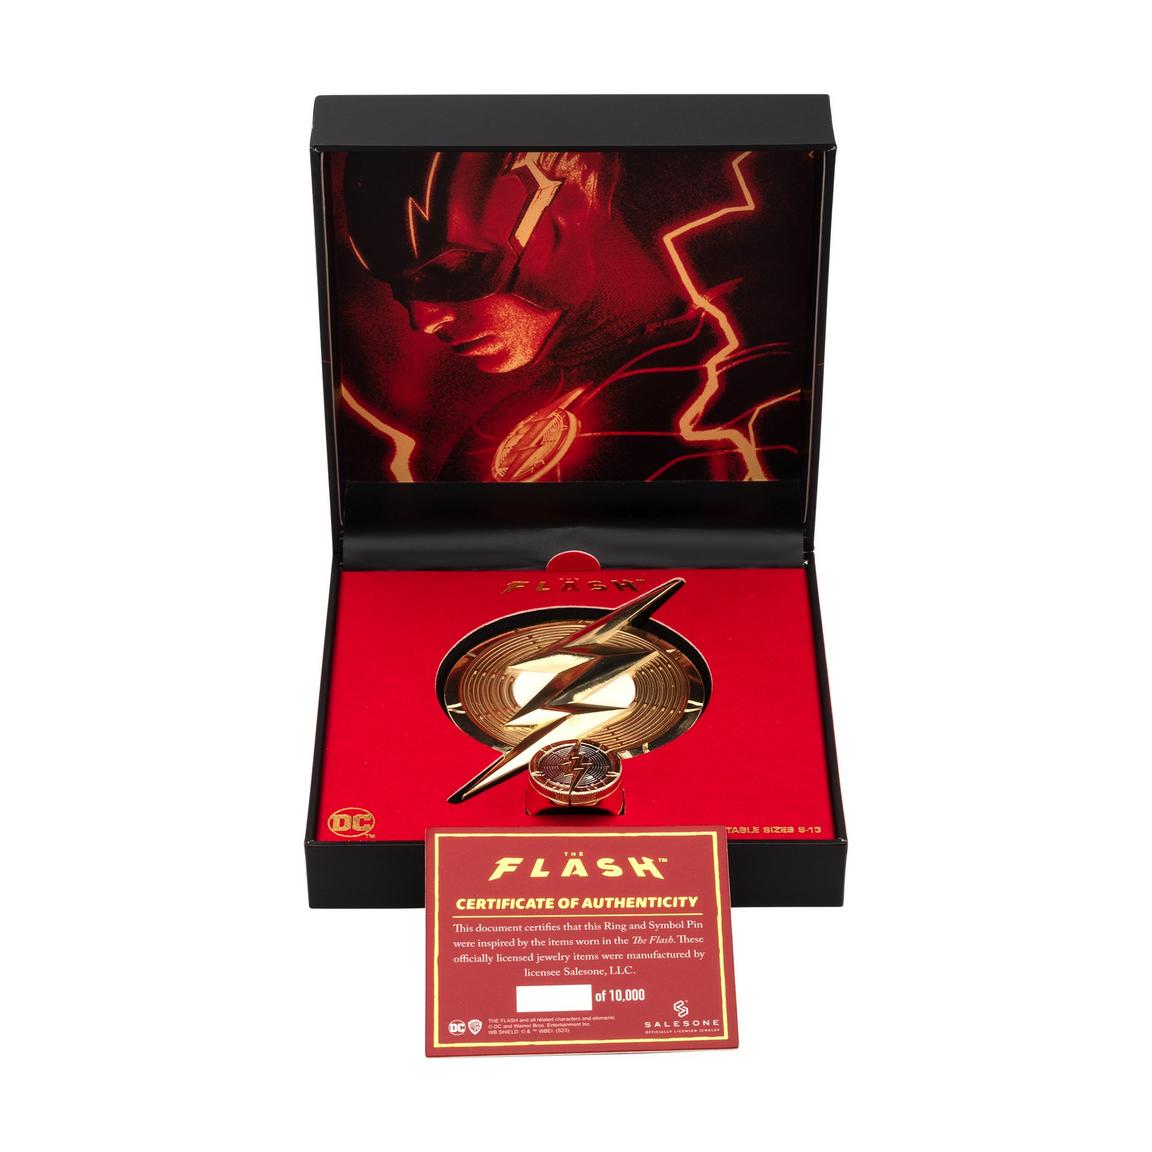 The Flash collector's box set featuring a large enamel pin, a ring, and a certificate of authenticity